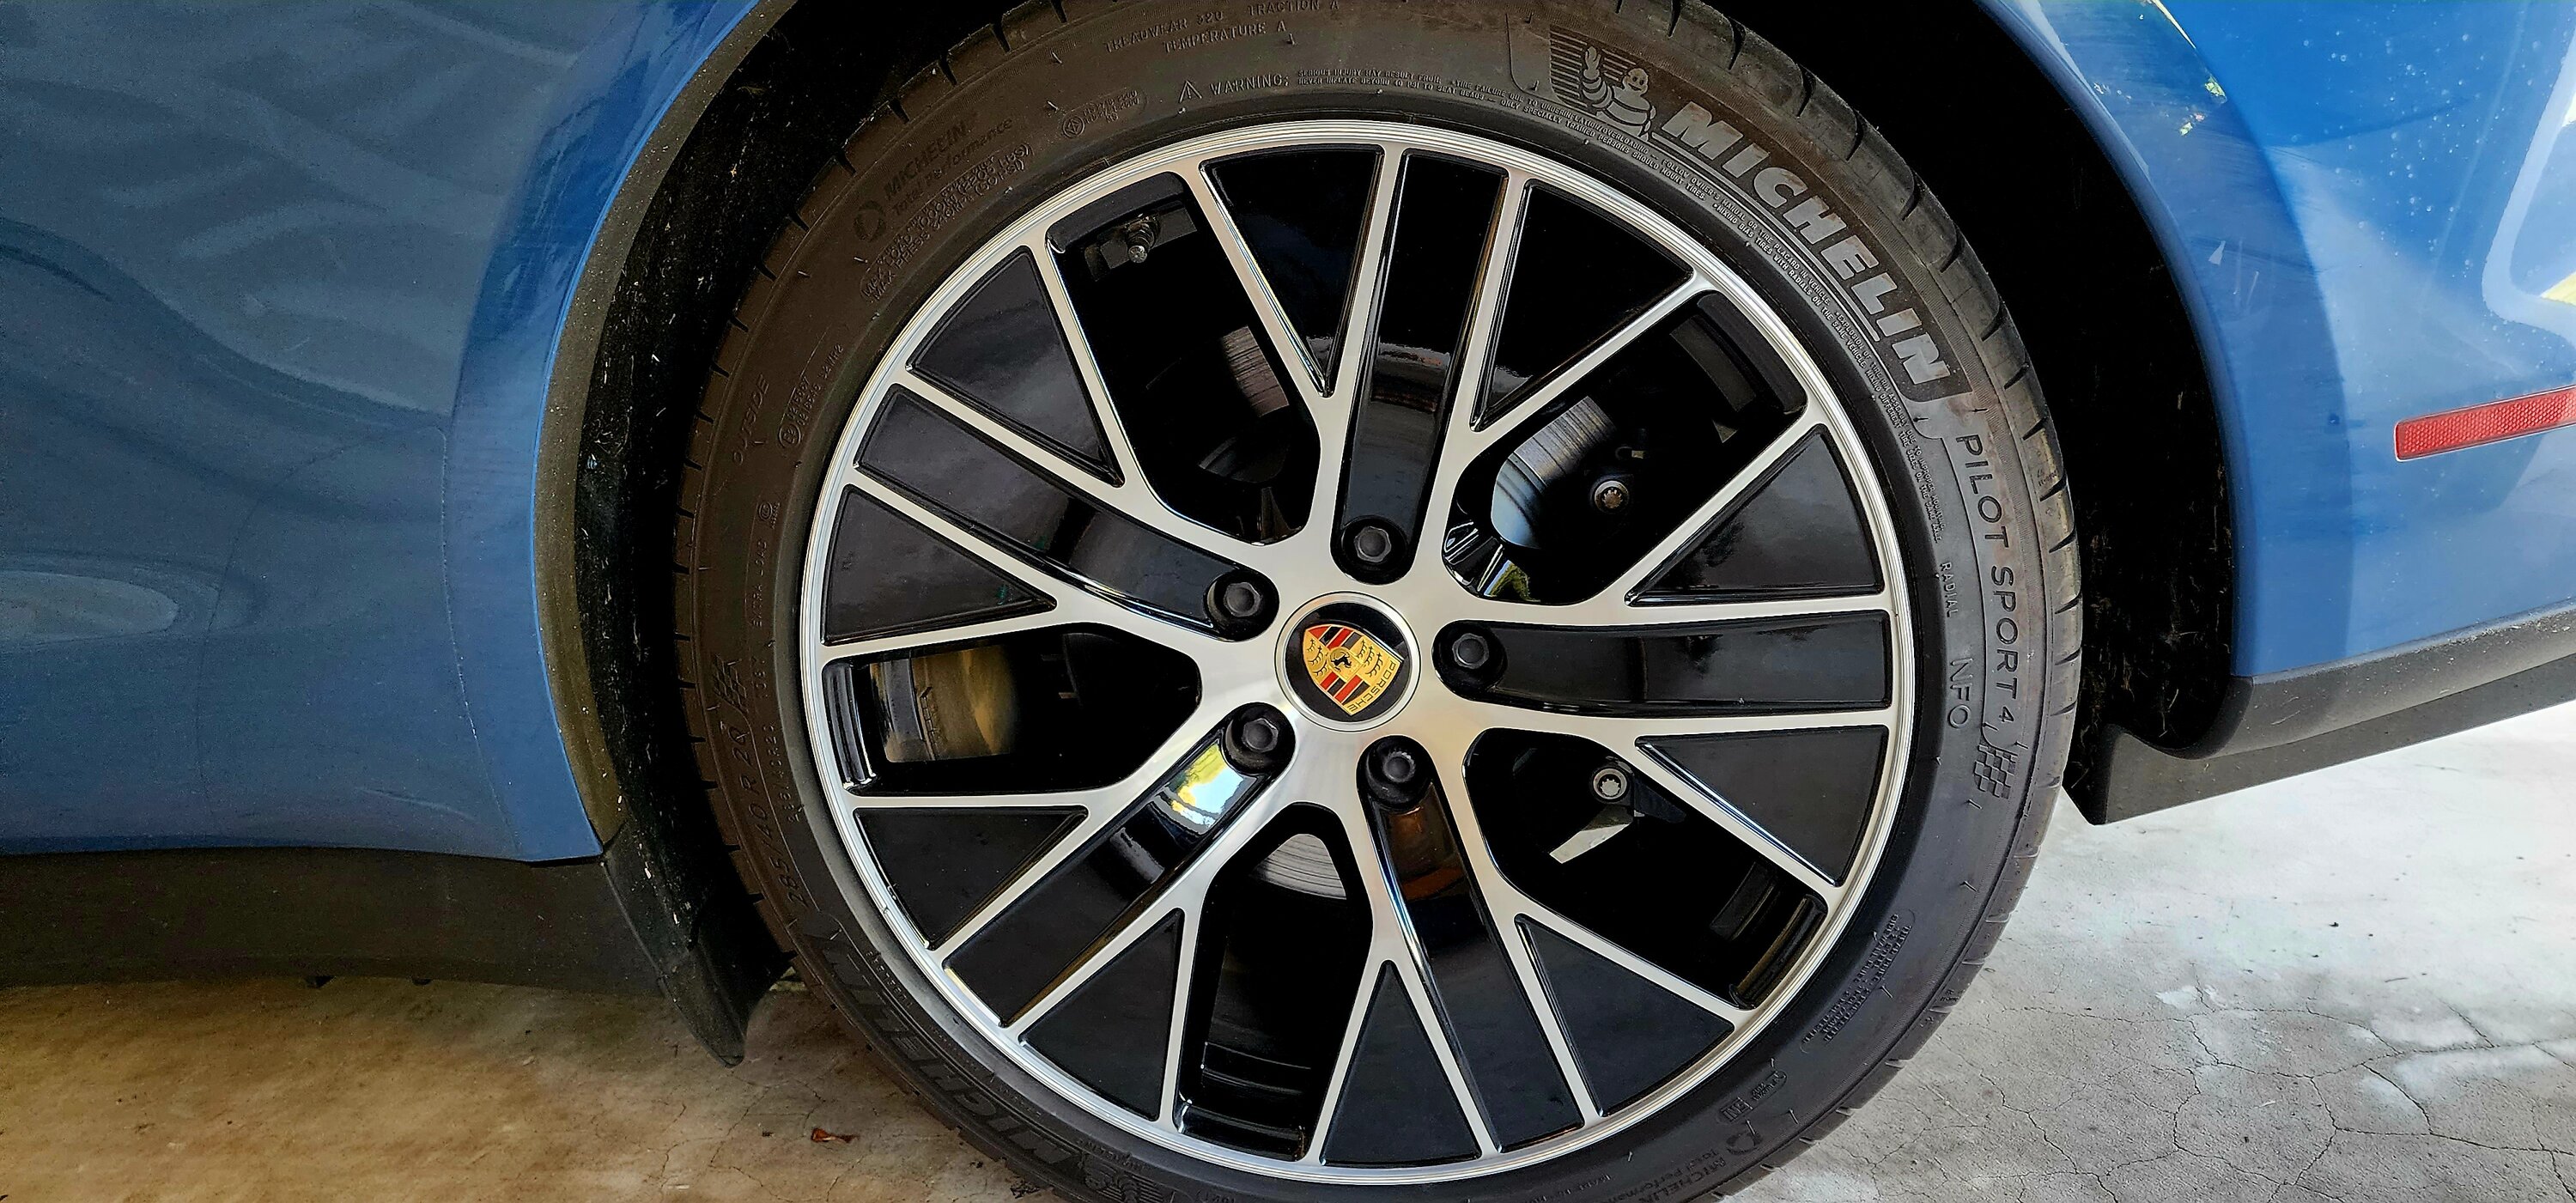 RimBlades Alloy Wheel Guards - Protect Your Rims In Style